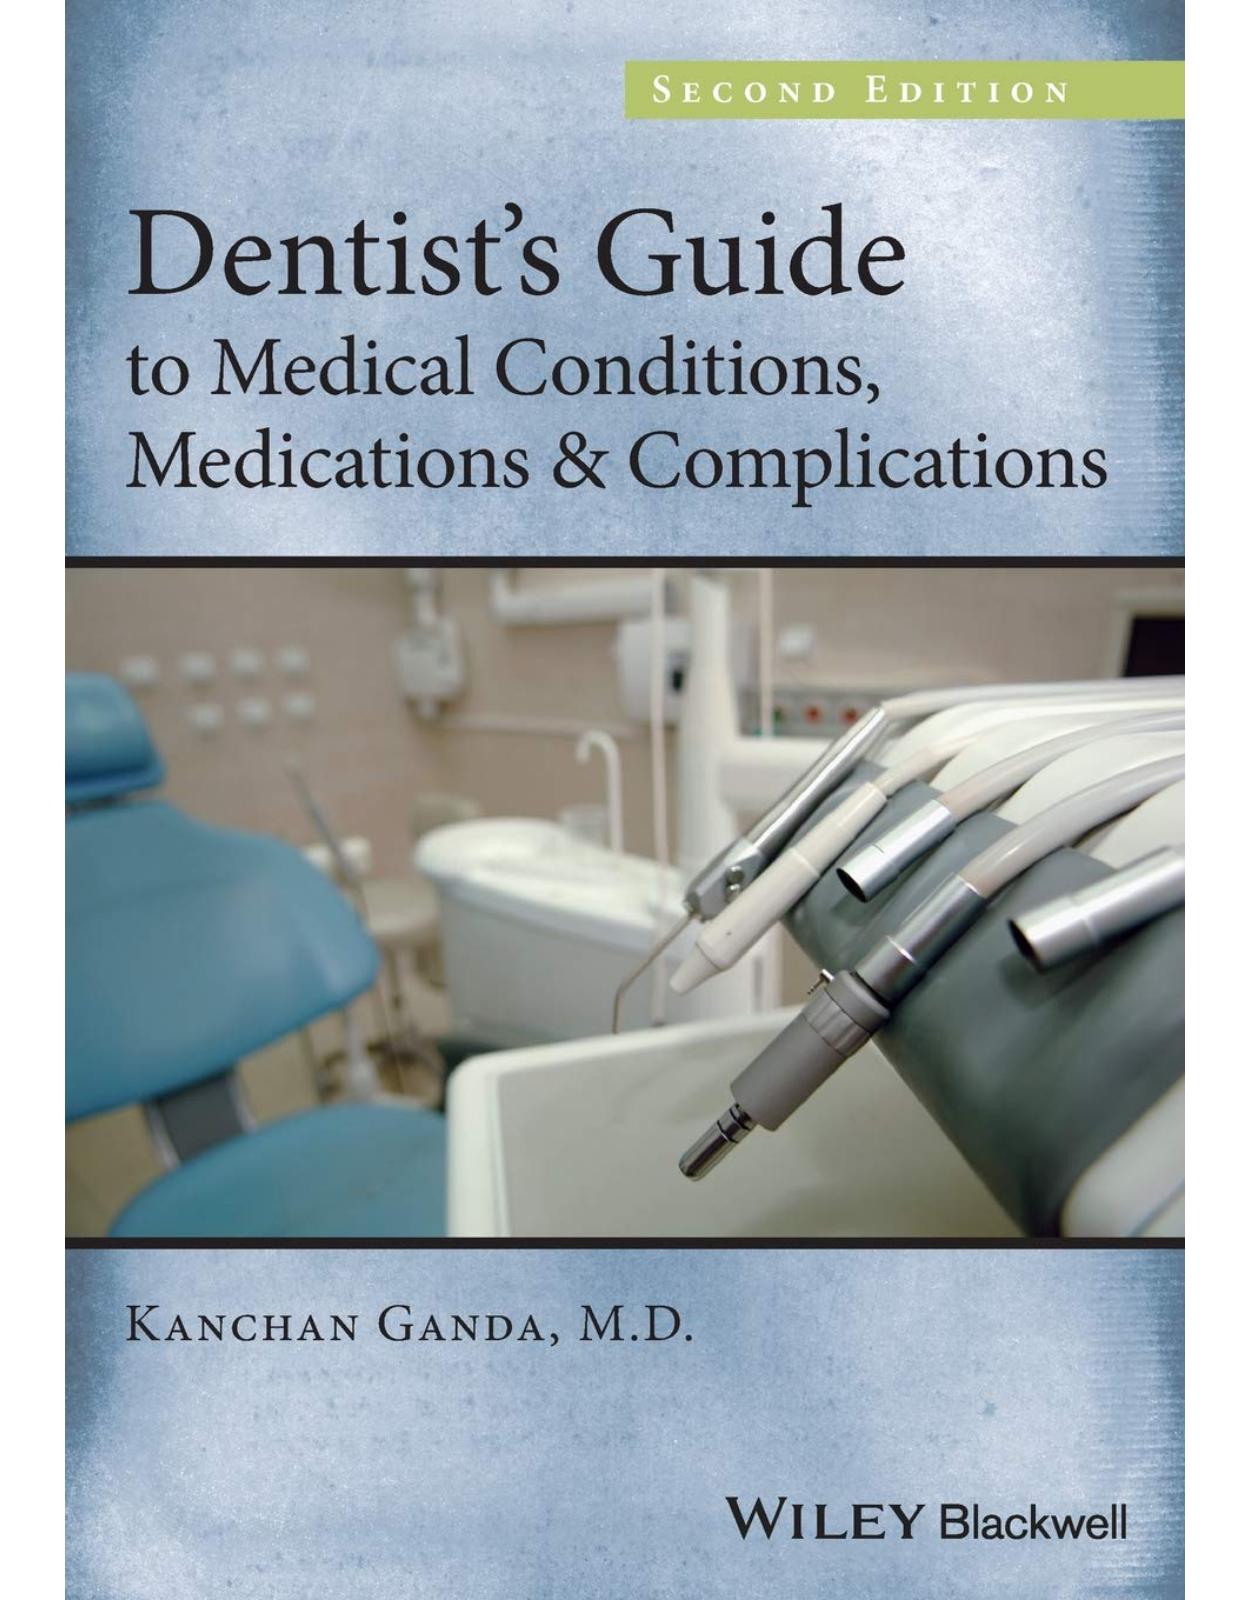 Dentist’s Guide to Medical Conditions, Medications and Complications, 2nd Edition